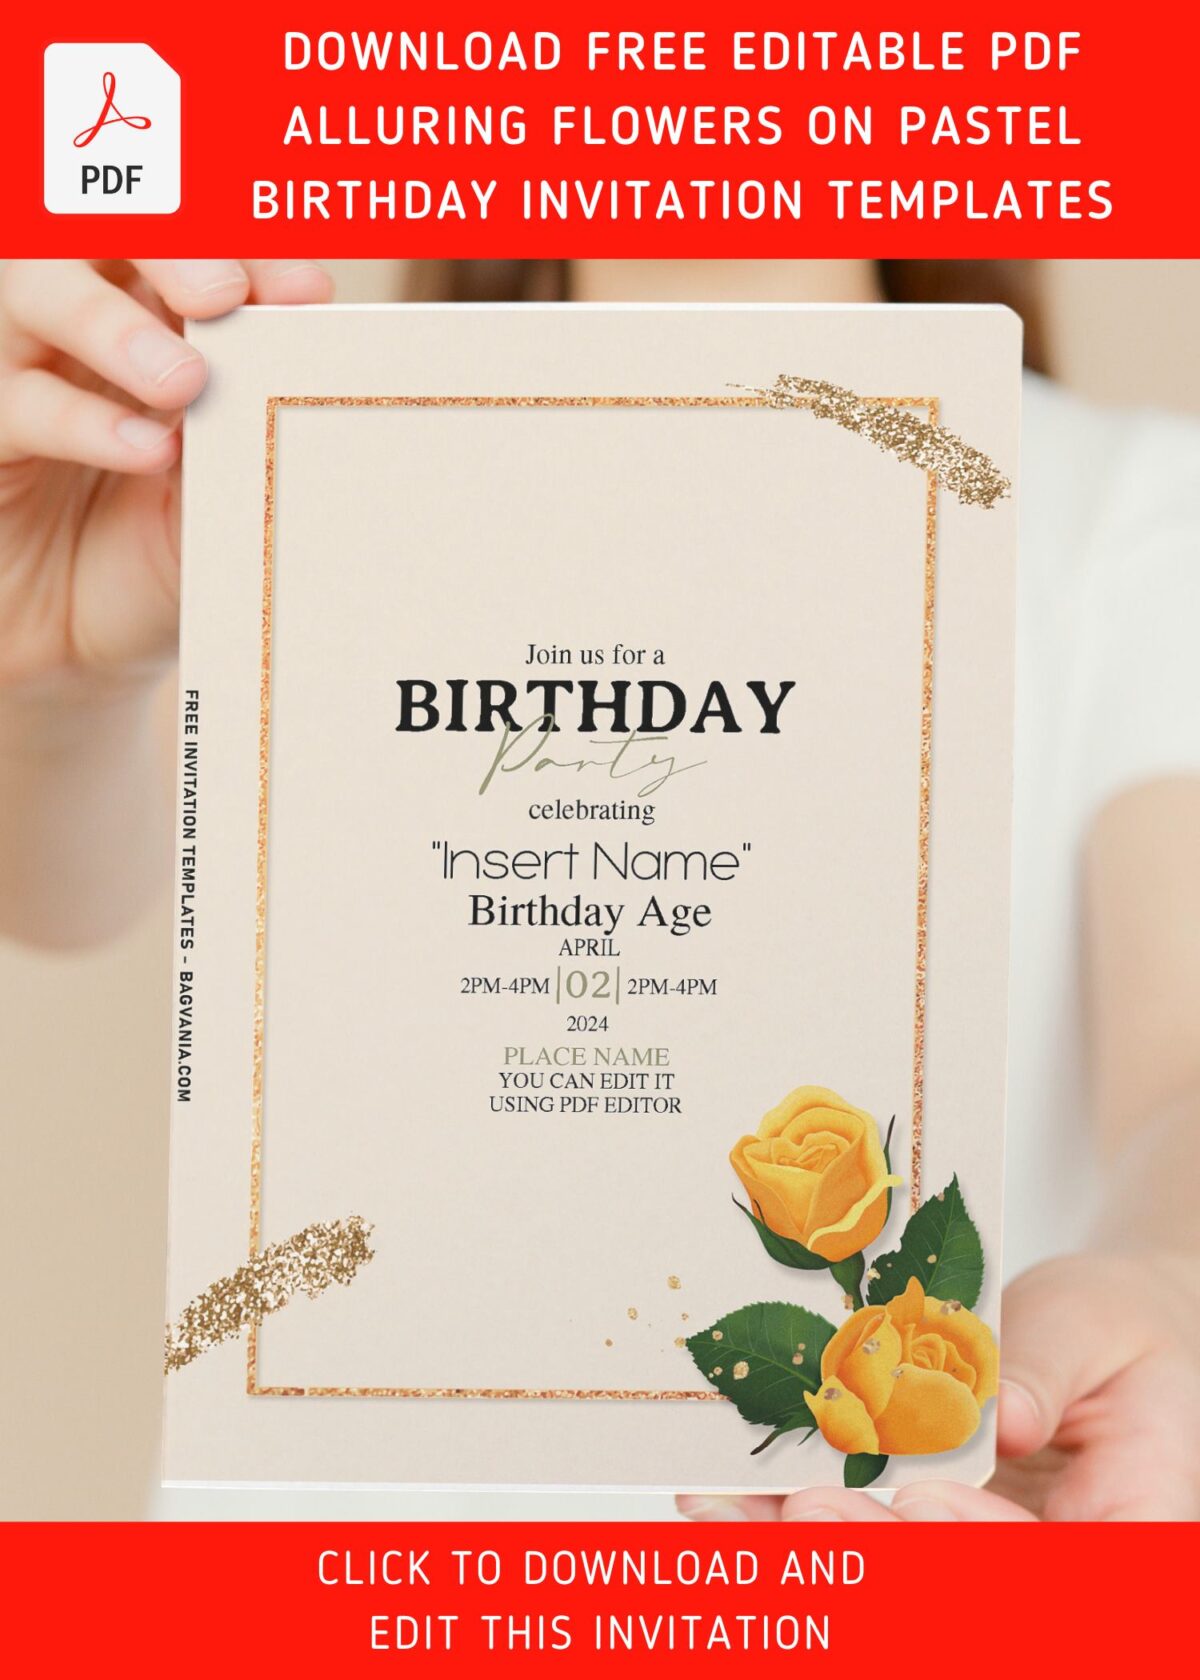 (Free Editable PDF) Natural Beauty Floral And Gold Birthday Invitation Templates with editable text